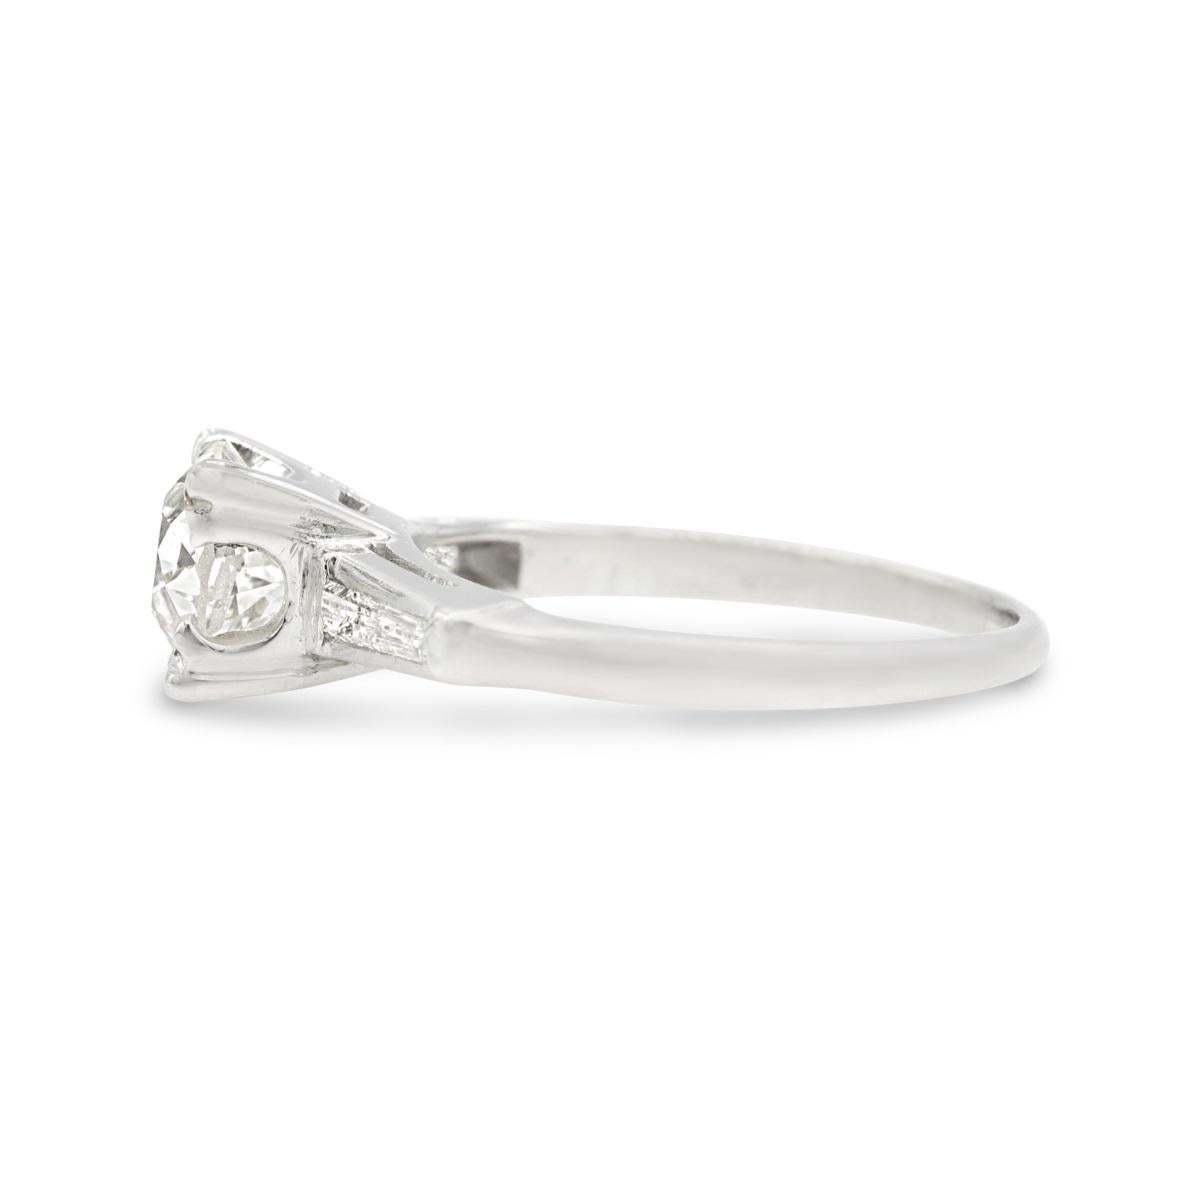 Old European Cut Art Deco GIA Certified 1.43 Ct. Diamond Engagement Ring N VVS2 For Sale